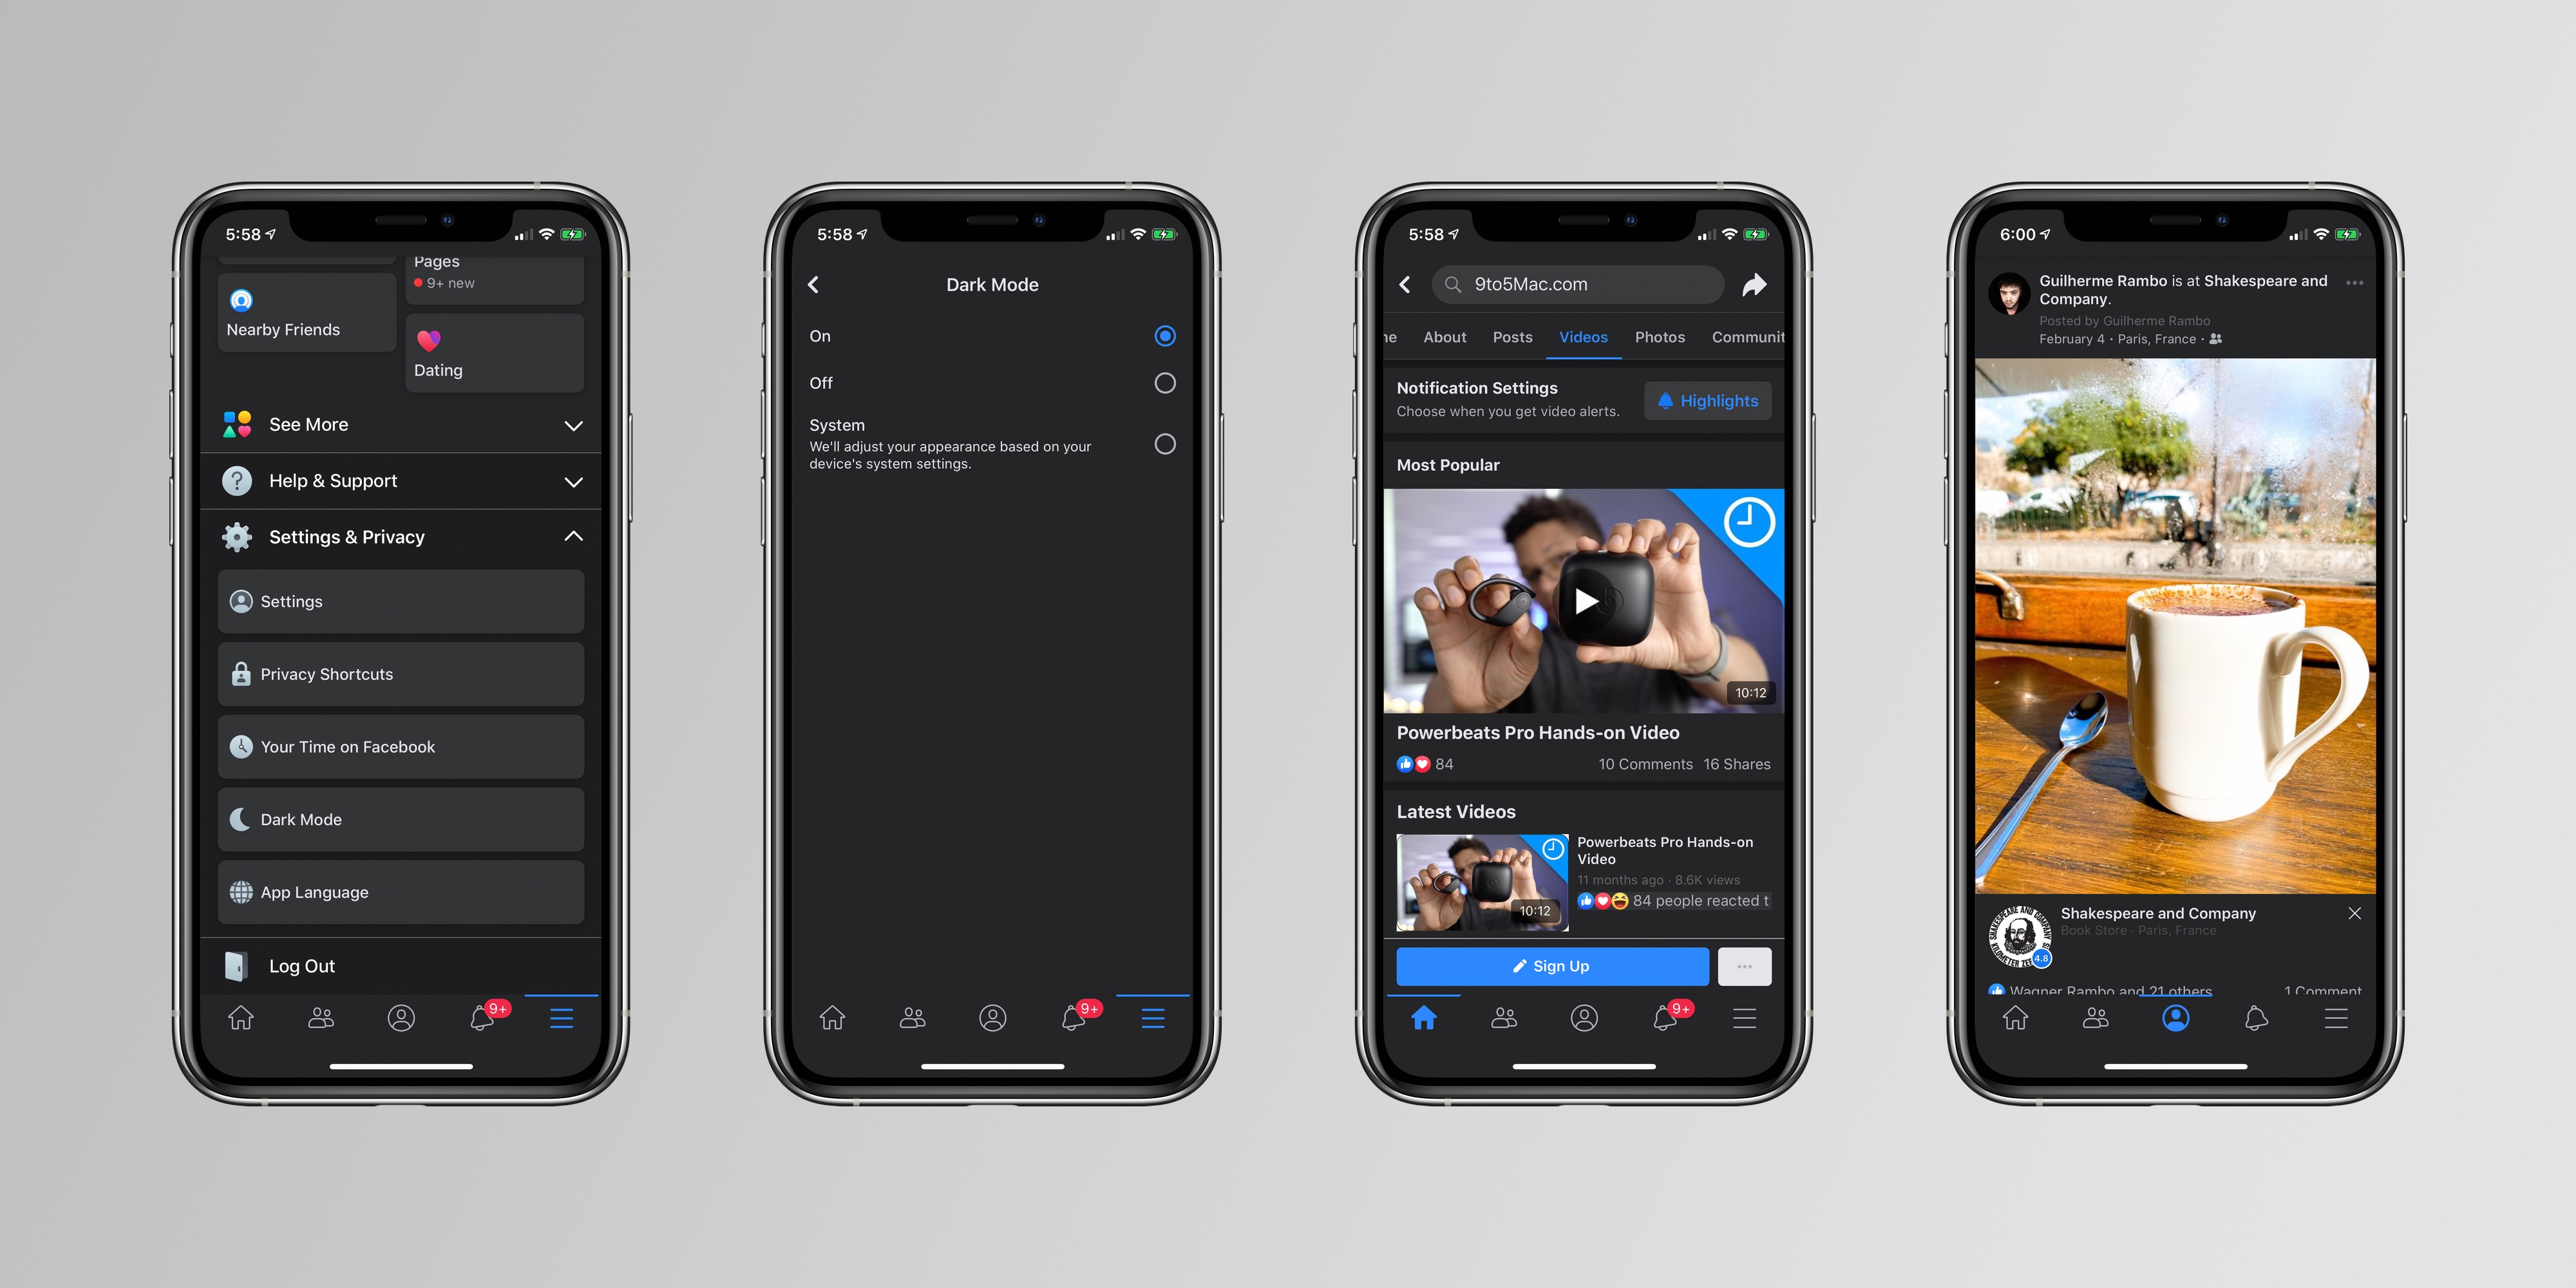 Facebook slowly begins rolling out Dark Mode support for iOS - 9to5Mac